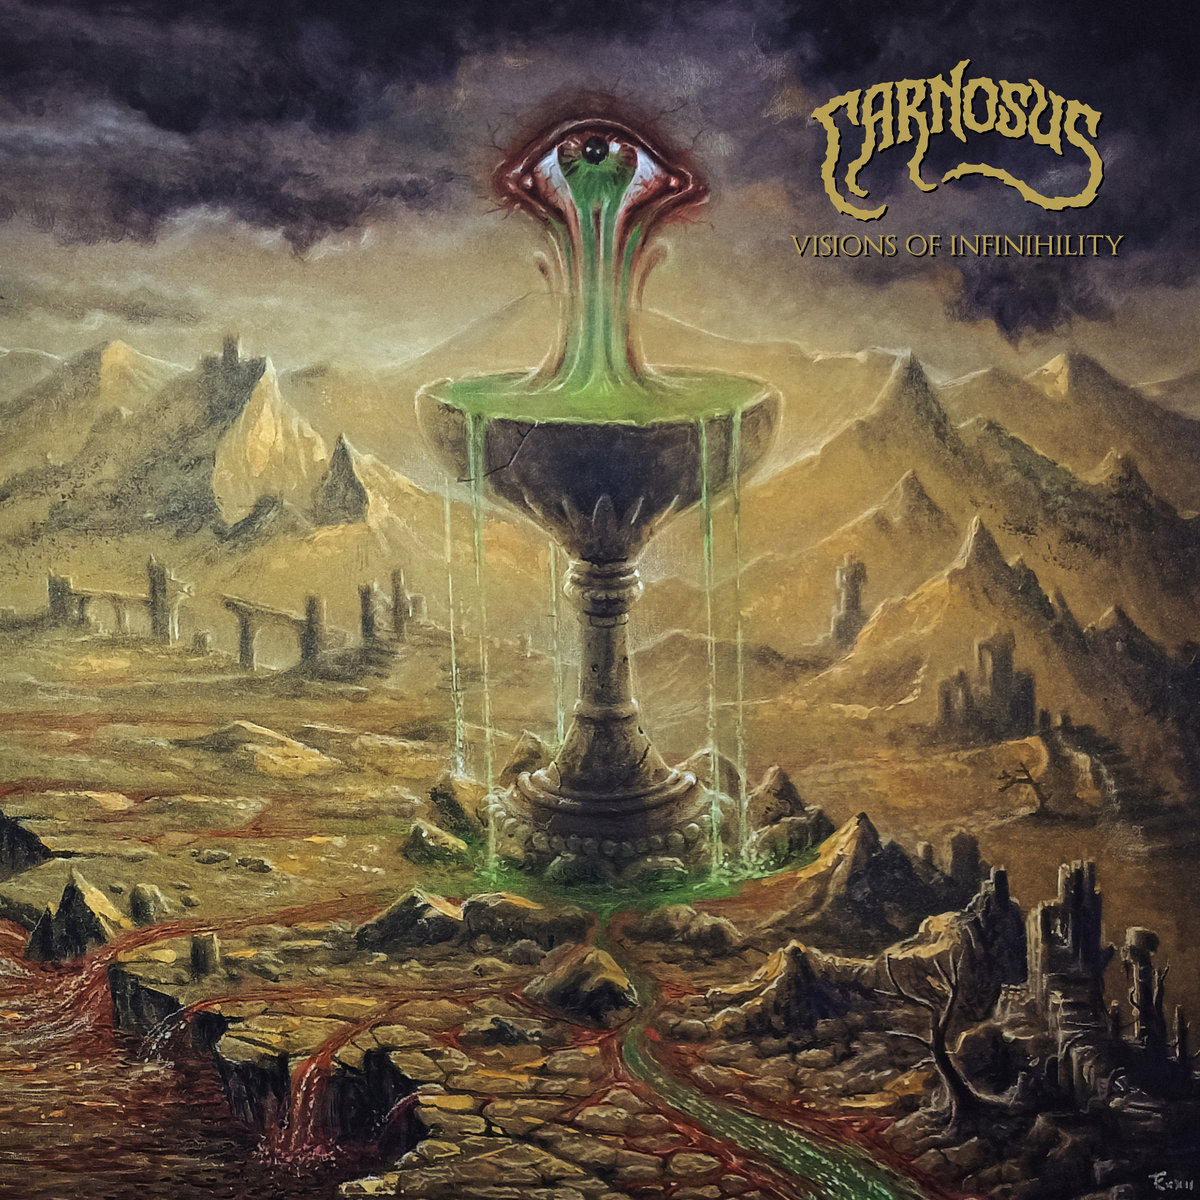 Review: Carnosus - Visions of Infinihility - The Progressive Subway